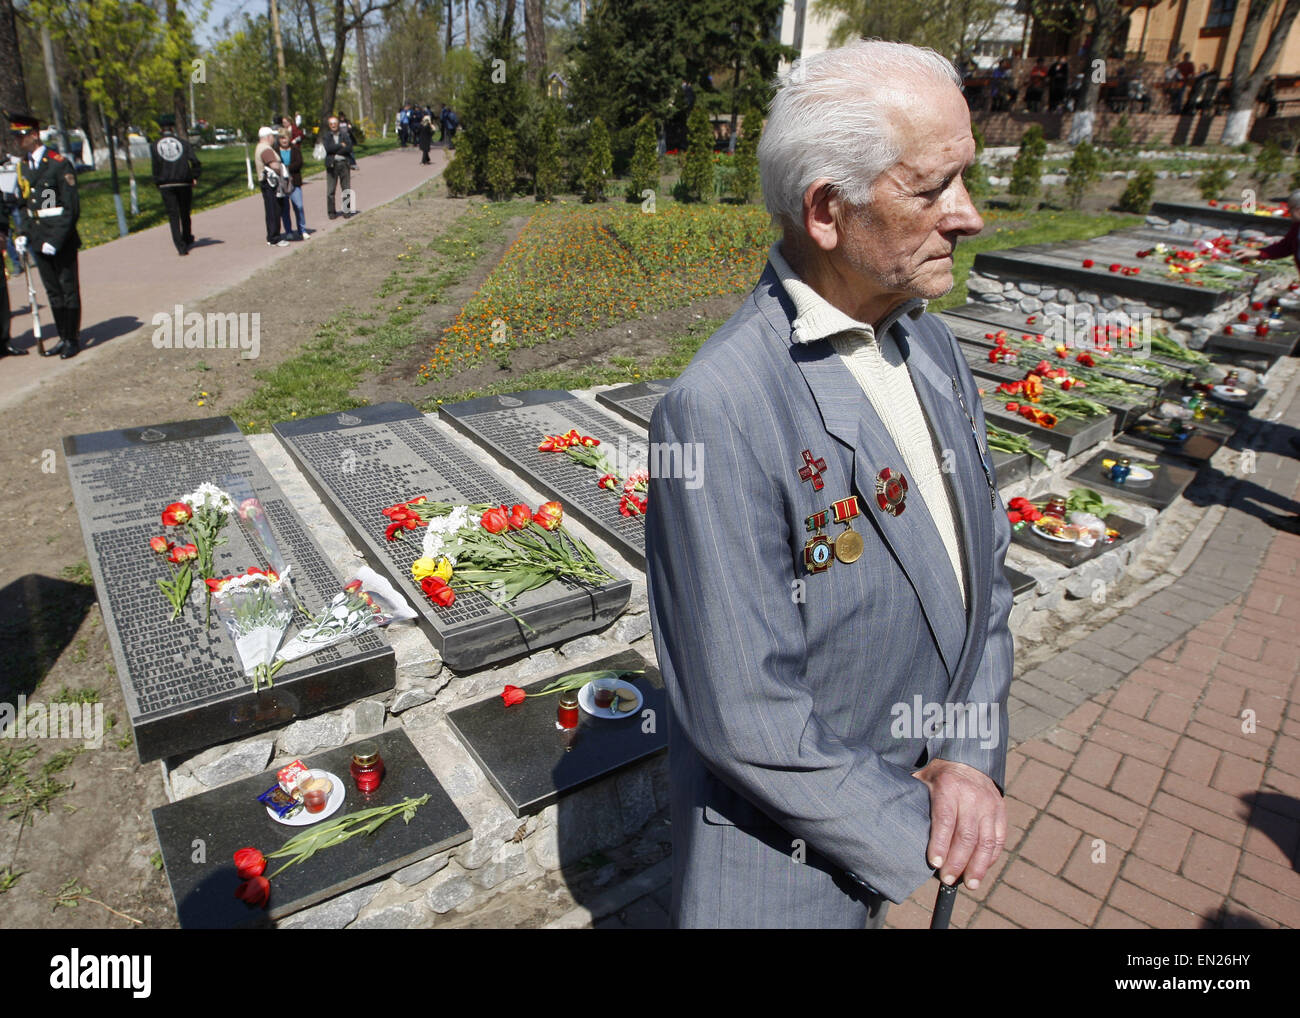 Kiev, Ukraine. 26th Apr, 2015. A former liquidator of the Chernobyl nuclear accident attends a commemoration ceremony at the Chernobyl victims' memorial in the Ukrainian capital of Kiev on April 26, 2015. The world marks the 29th anniversary of the world's worst nuclear disaster at Chernobyl nuclear pant in Ukraine. The explosion at reactor number four of the Chernobyl power plant in the early hours of April 26, 1986 sent radioactive fallout into the atmosphere that spread from the Soviet Union across Europe. © Serg Glovny/ZUMA Wire/ZUMAPRESS.com/Alamy Live News Stock Photo